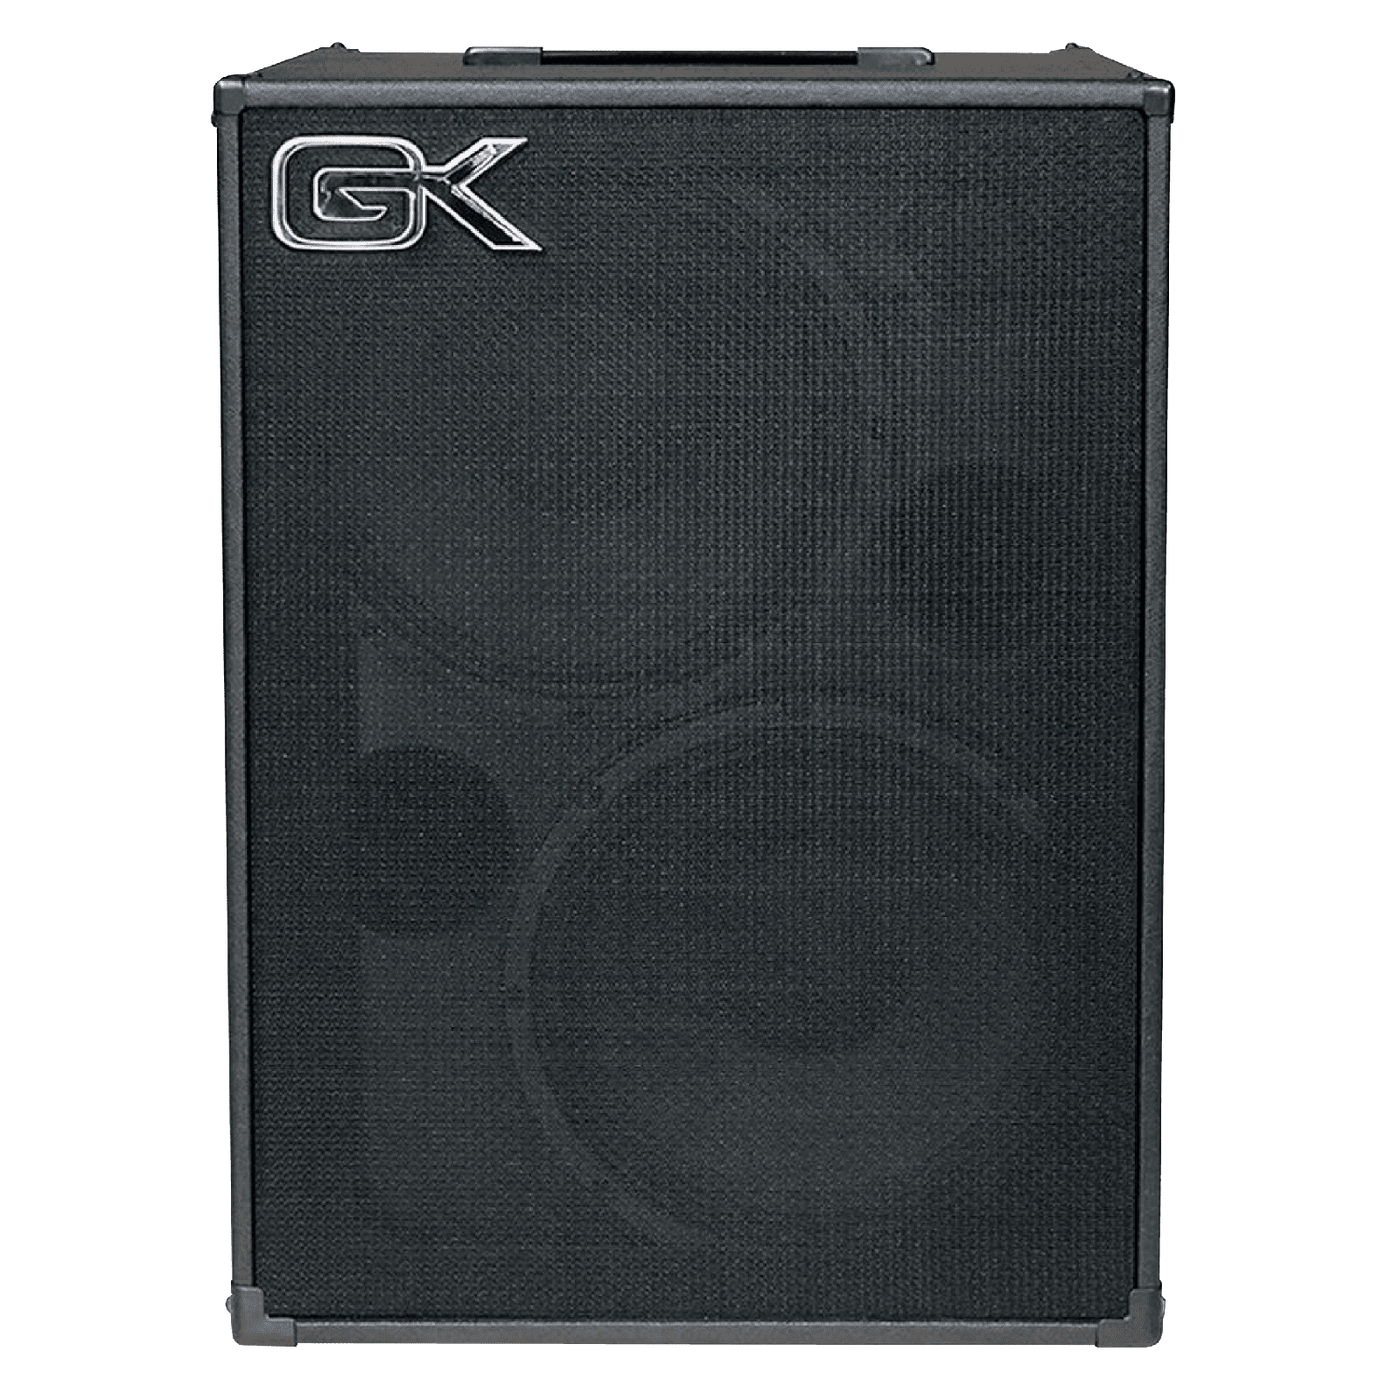 Gallien-Krueger MB 210-II - The Gallien-Krueger MB210-II is your ideal grab 'n' go bass combo amp. G-K's MB II Series combos sport ultra-efficient digital power plants and CX series ceramic speakers, making them unbelievably lightweight. Another cool inno